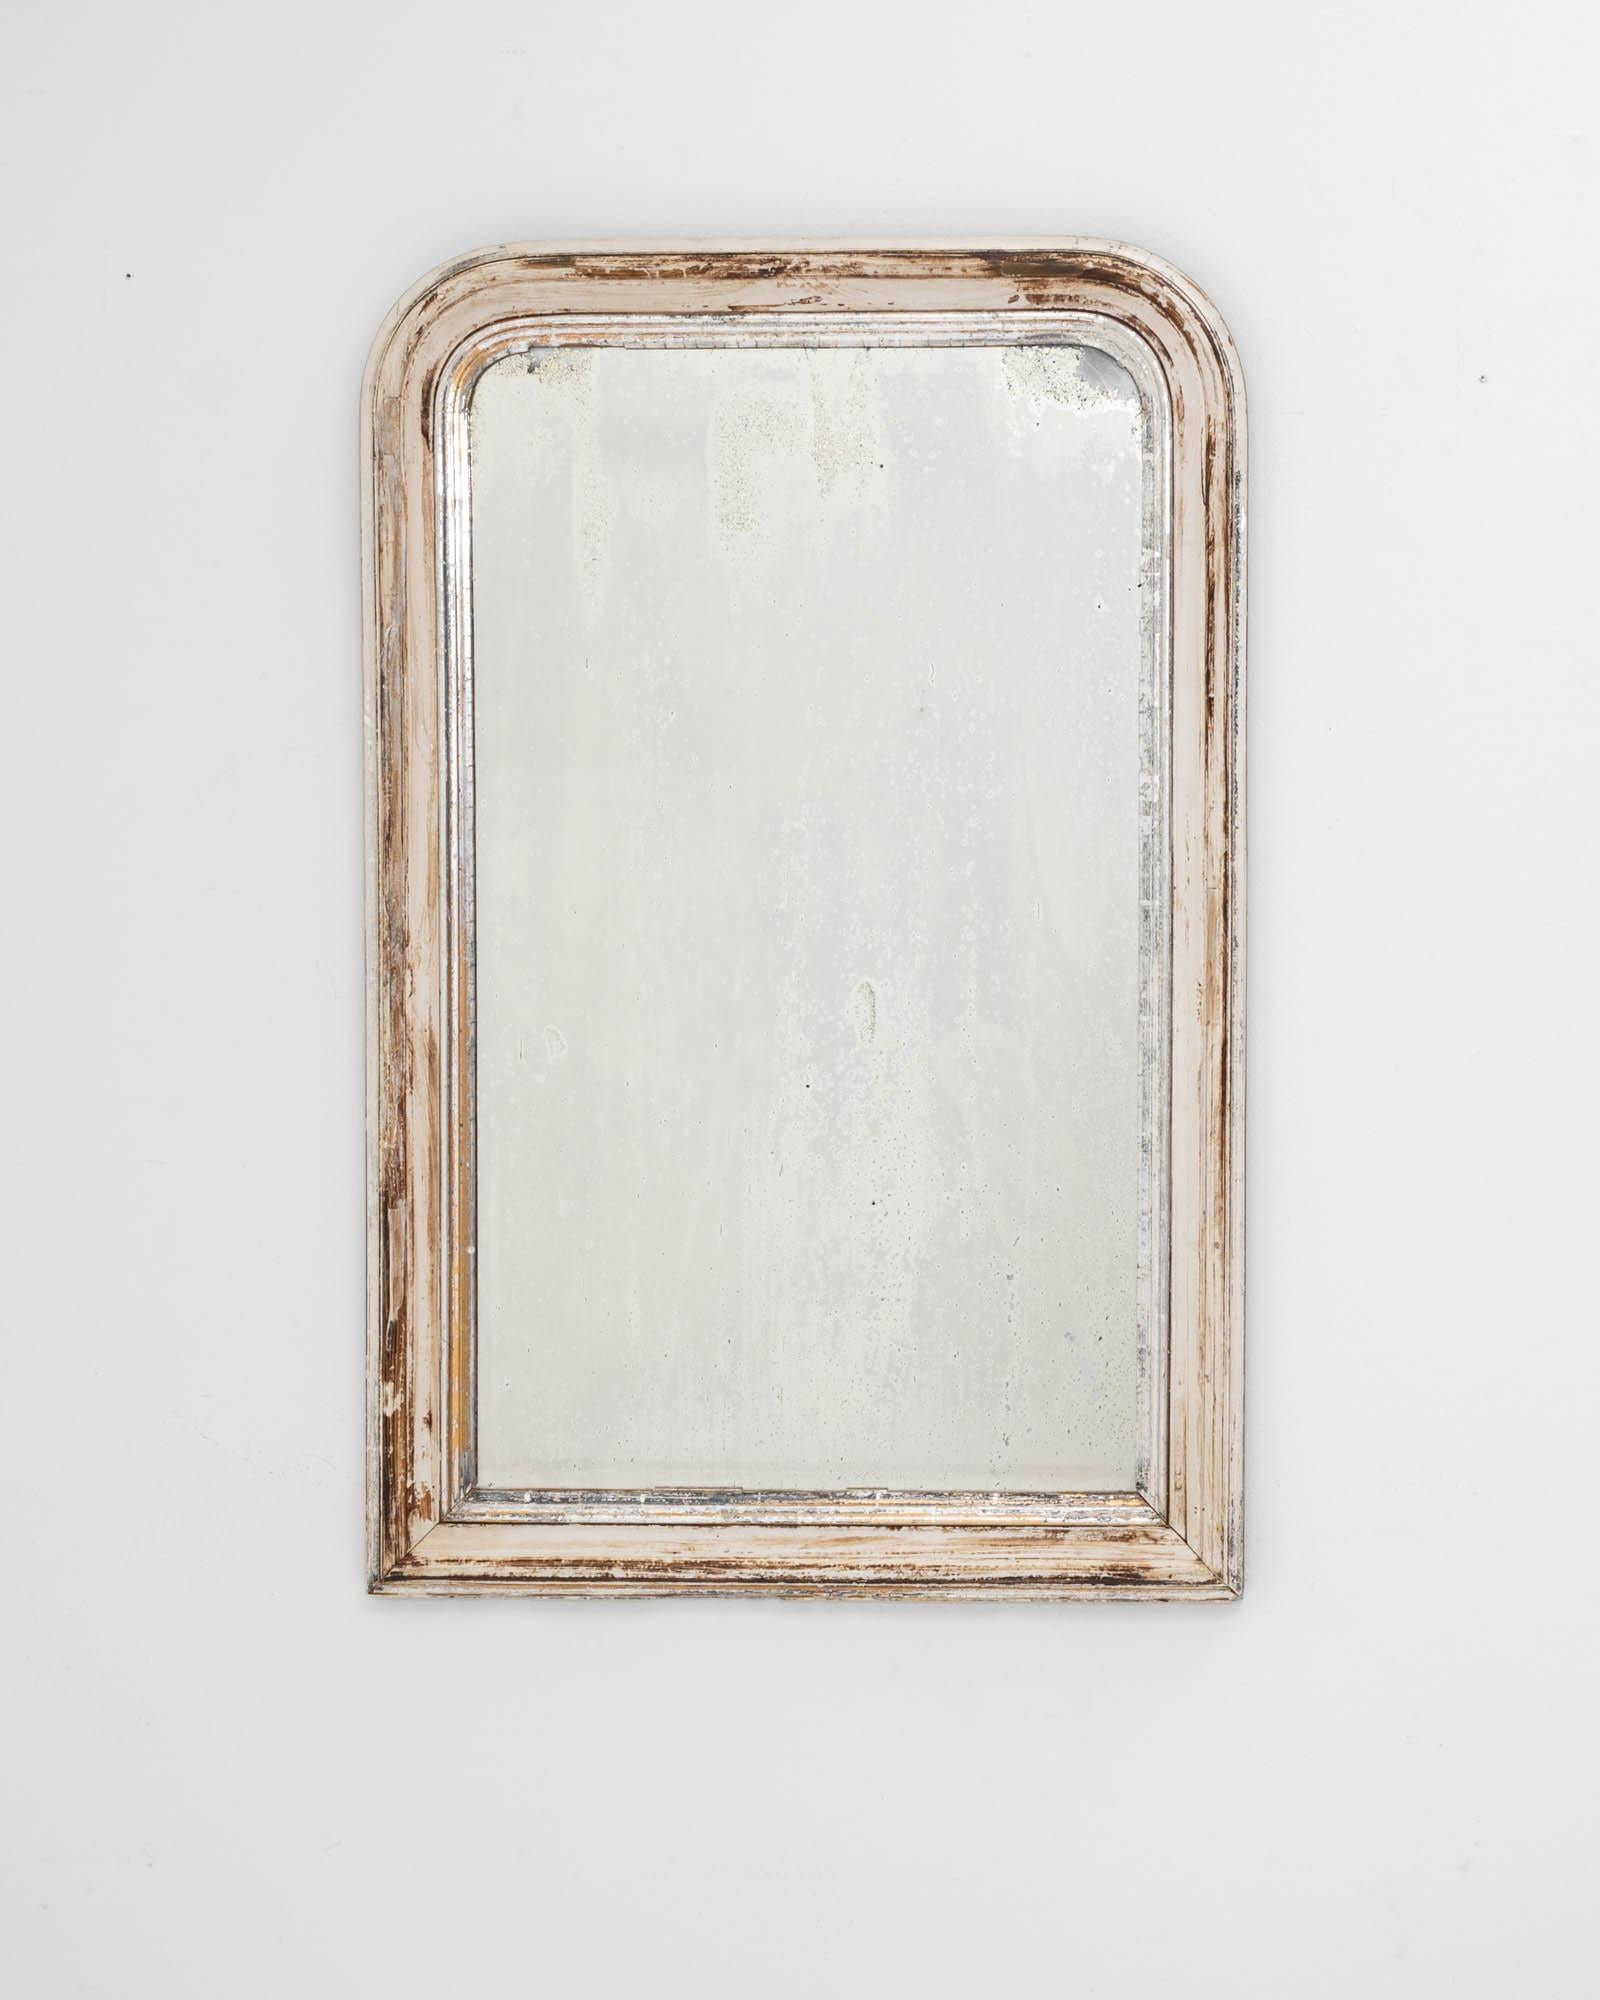 Graceful yet restrained, this antique wooden wall mirror has a serene simplicity. Made in France in the 1800s, the design reflects the stripped-back elegance of Louis Philipe style. The rounded upper corners of the frame bring elegance to the form,